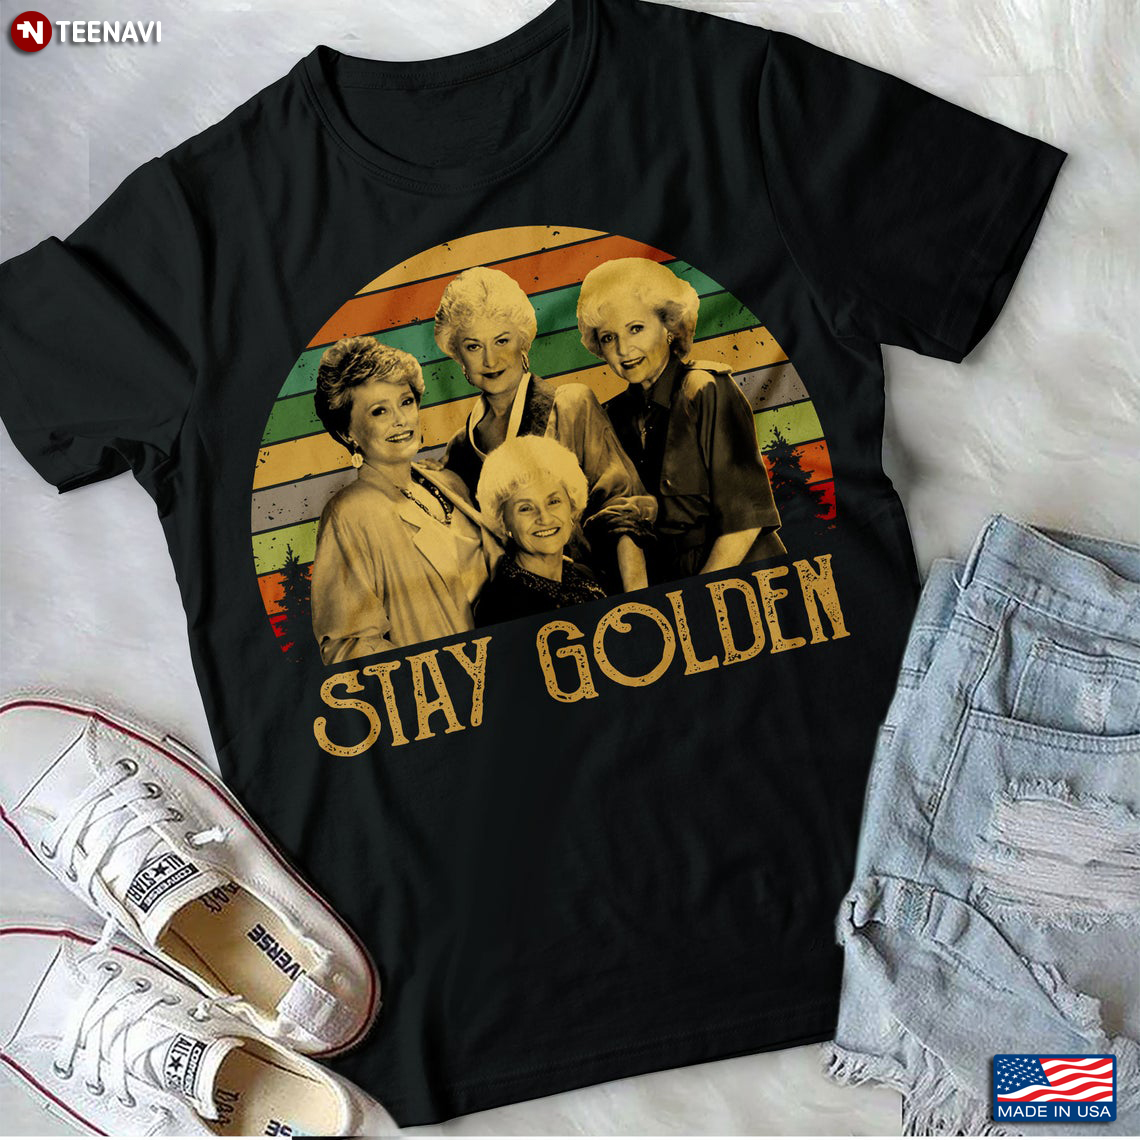 Stay Golden The Golden Girls Betty White Rue McClanahan Beatrice Arthur And Estelle Getty Vintage